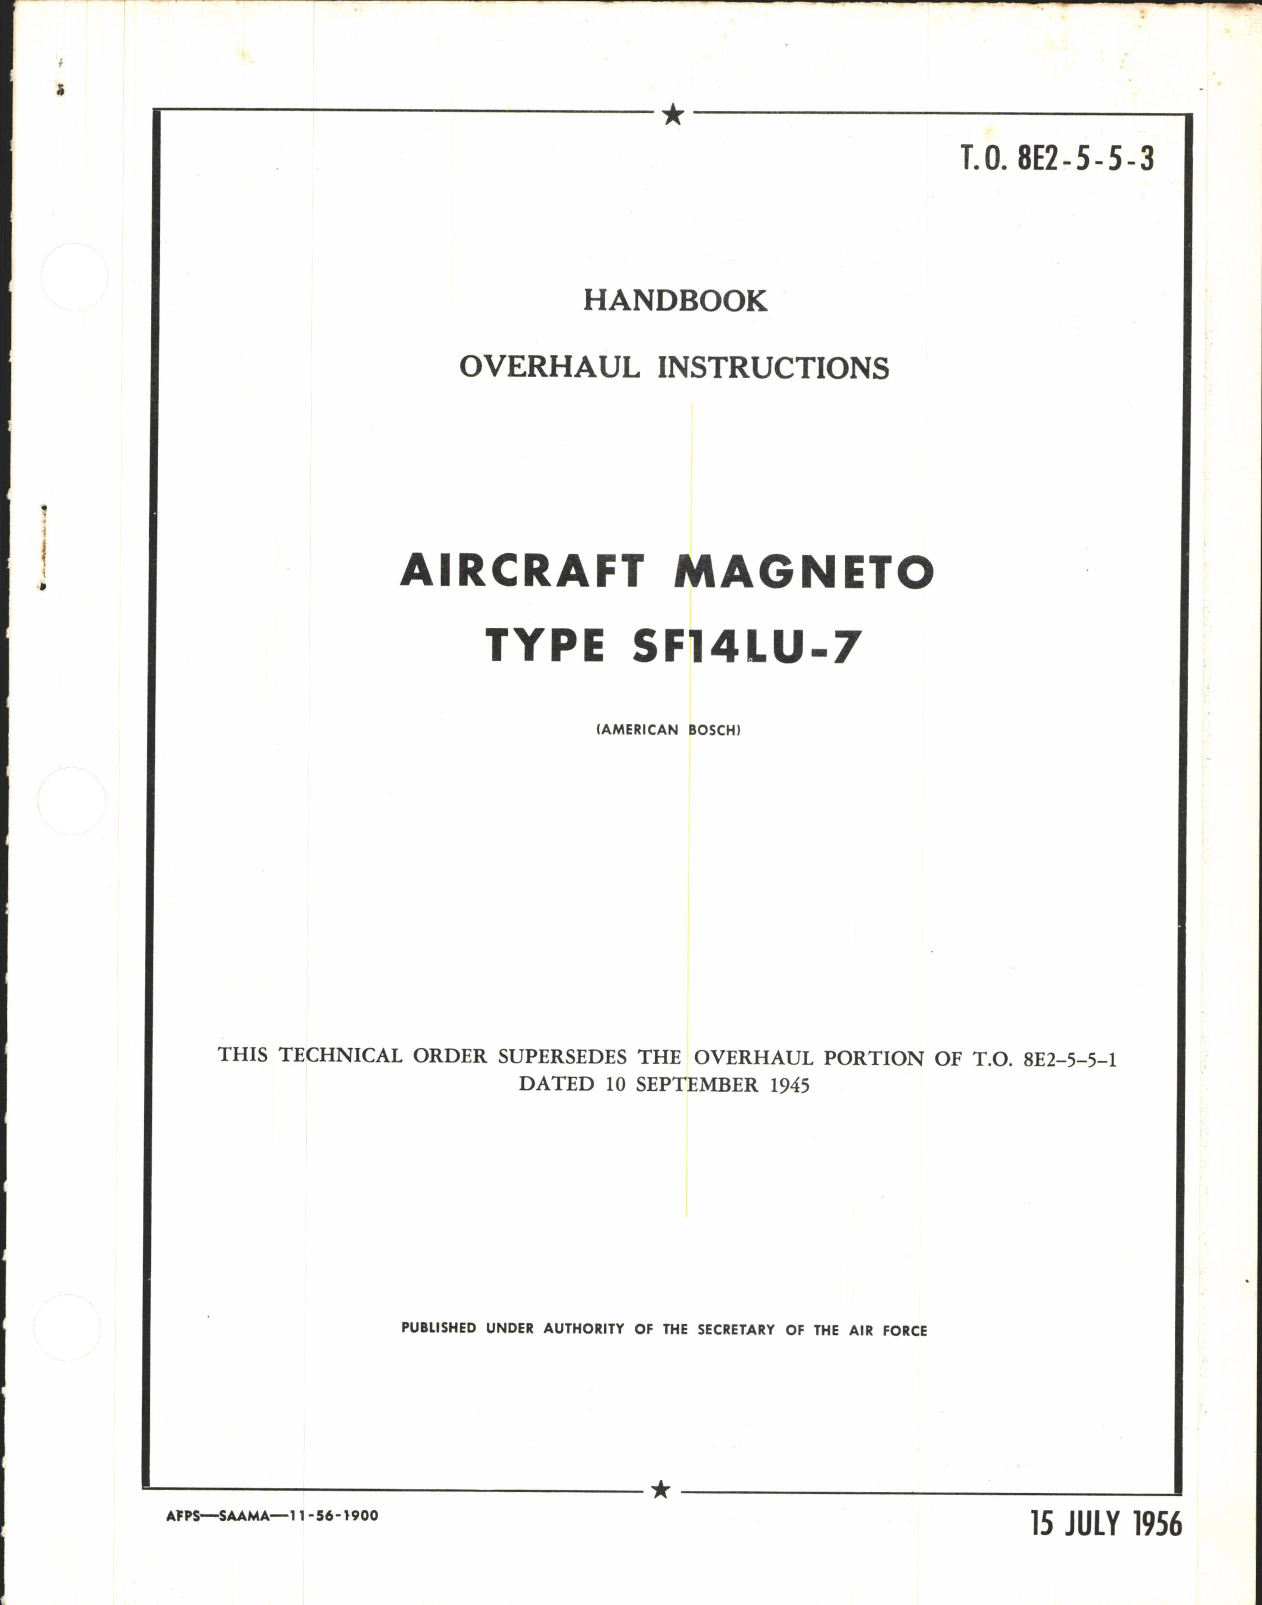 Sample page 1 from AirCorps Library document: Overhaul Instructions for Aircraft Magneto Type SF14LU-7